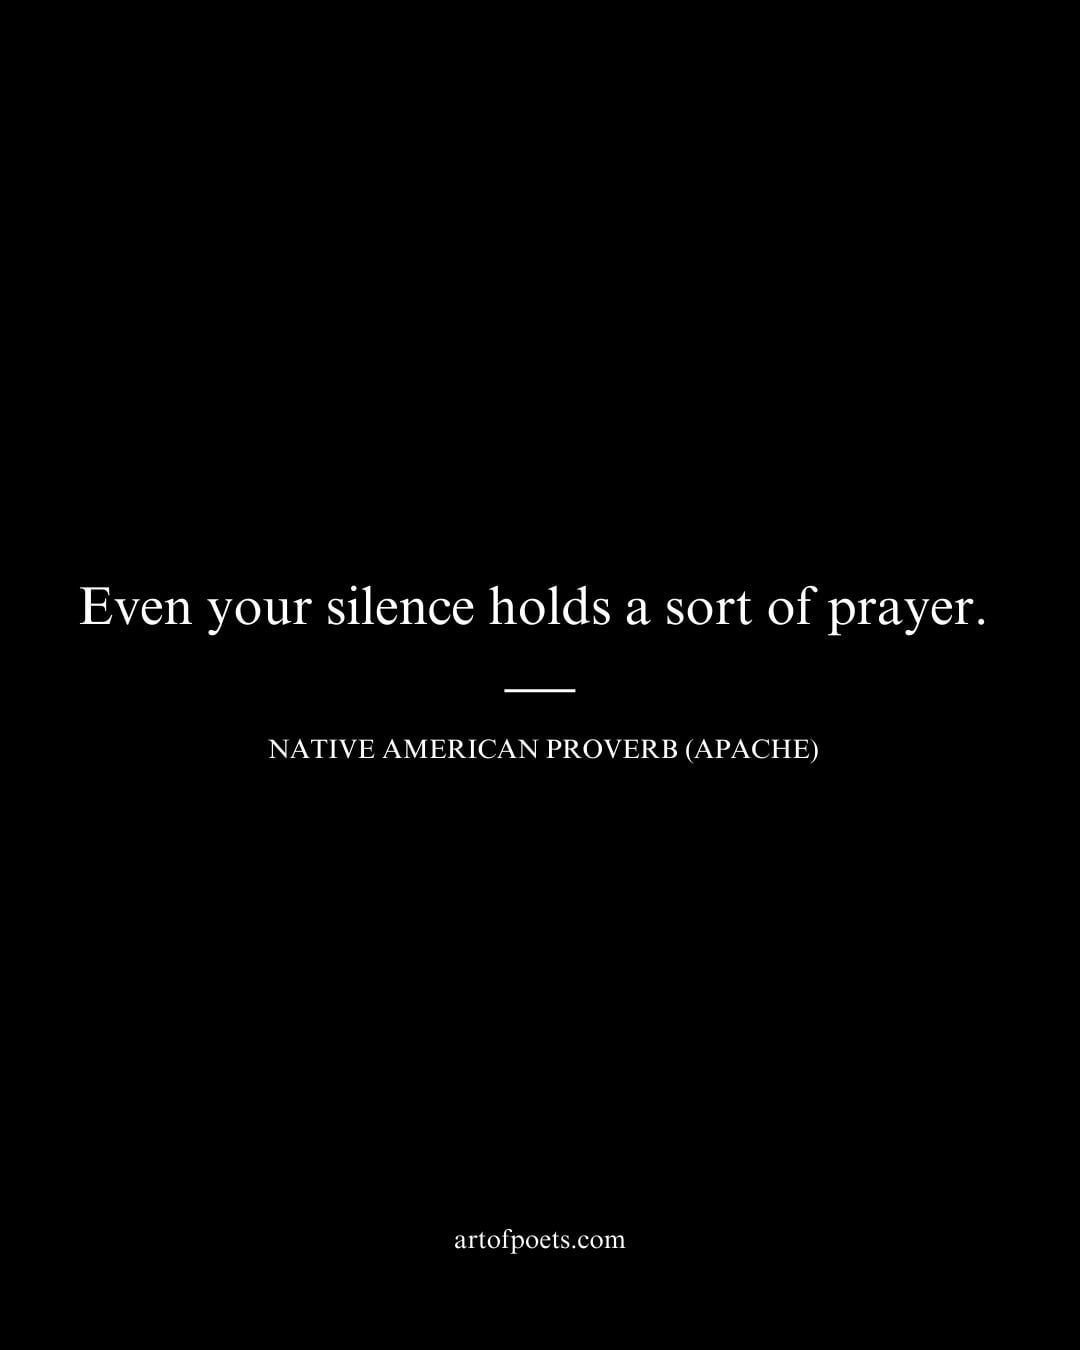 Even your silence holds a sort of prayer